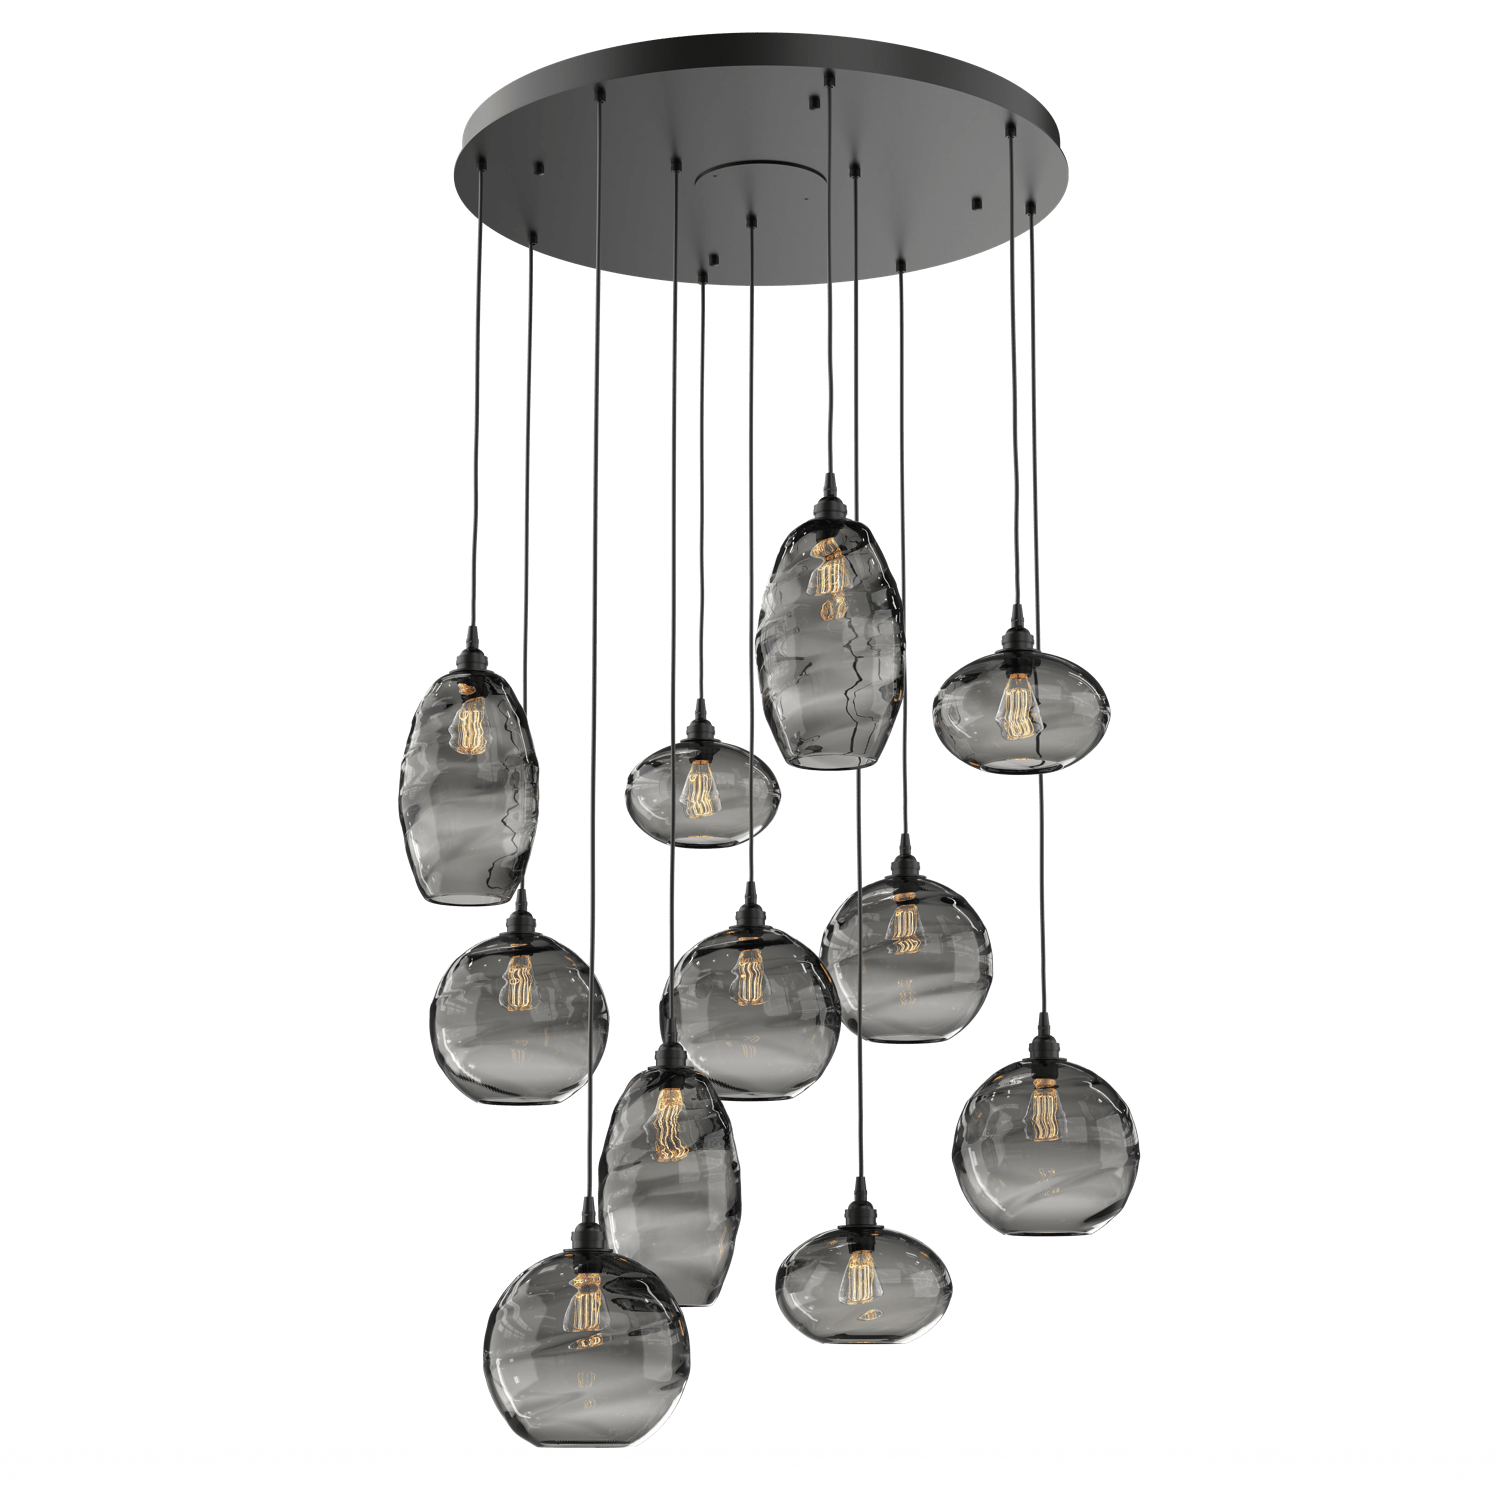 CHB0048-11-MB-OS-Hammerton-Studio-Optic-Blown-Glass-Misto-11-light-round-pendant-chandelier-with-matte-black-finish-and-optic-smoke-blown-glass-shades-and-incandescent-lamping